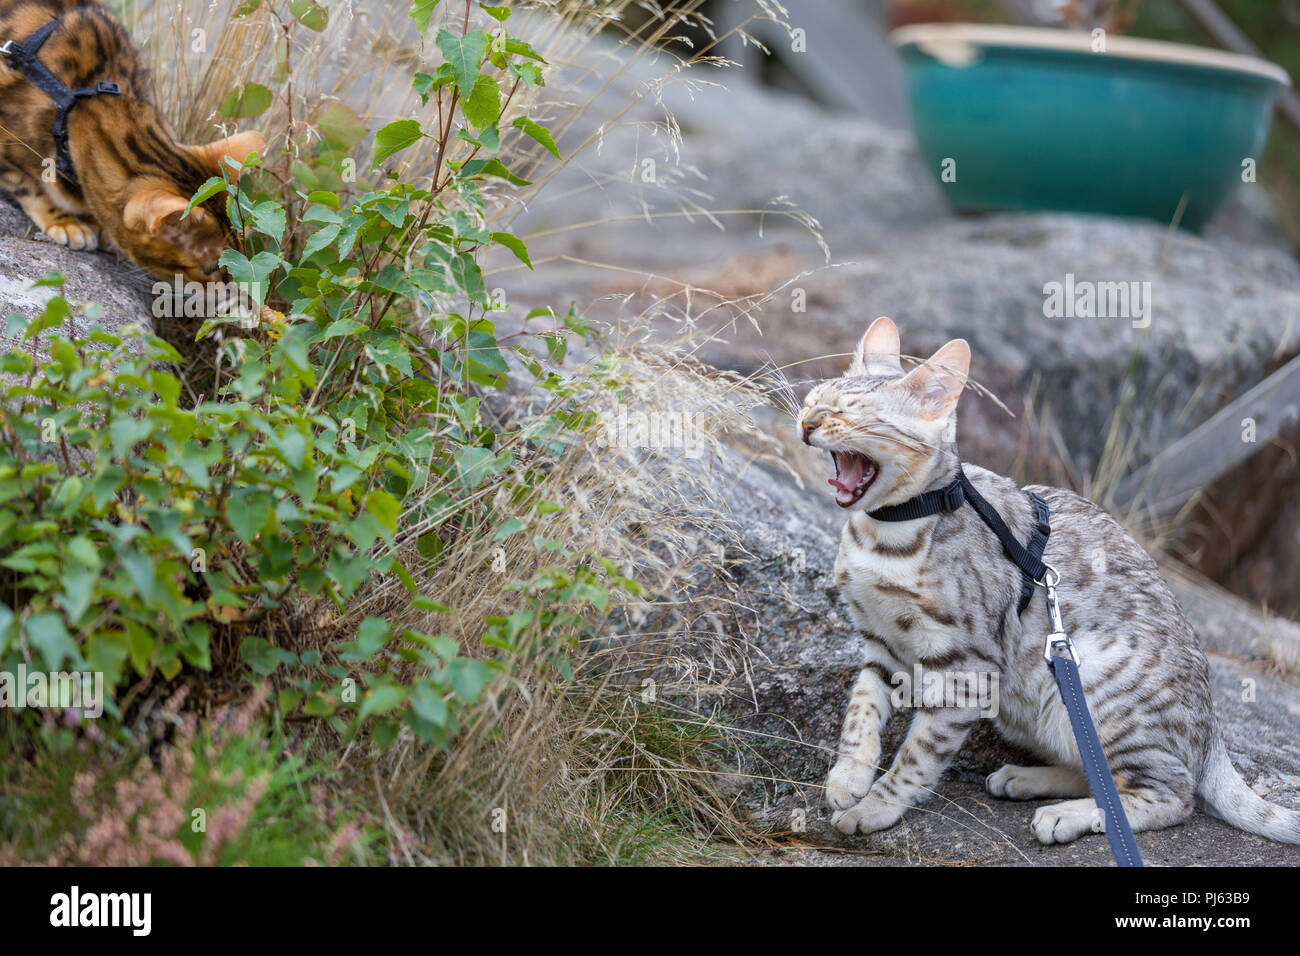 Adult Bengal cat introduction to younger Bengal cat kitten outdoors Stock Photo